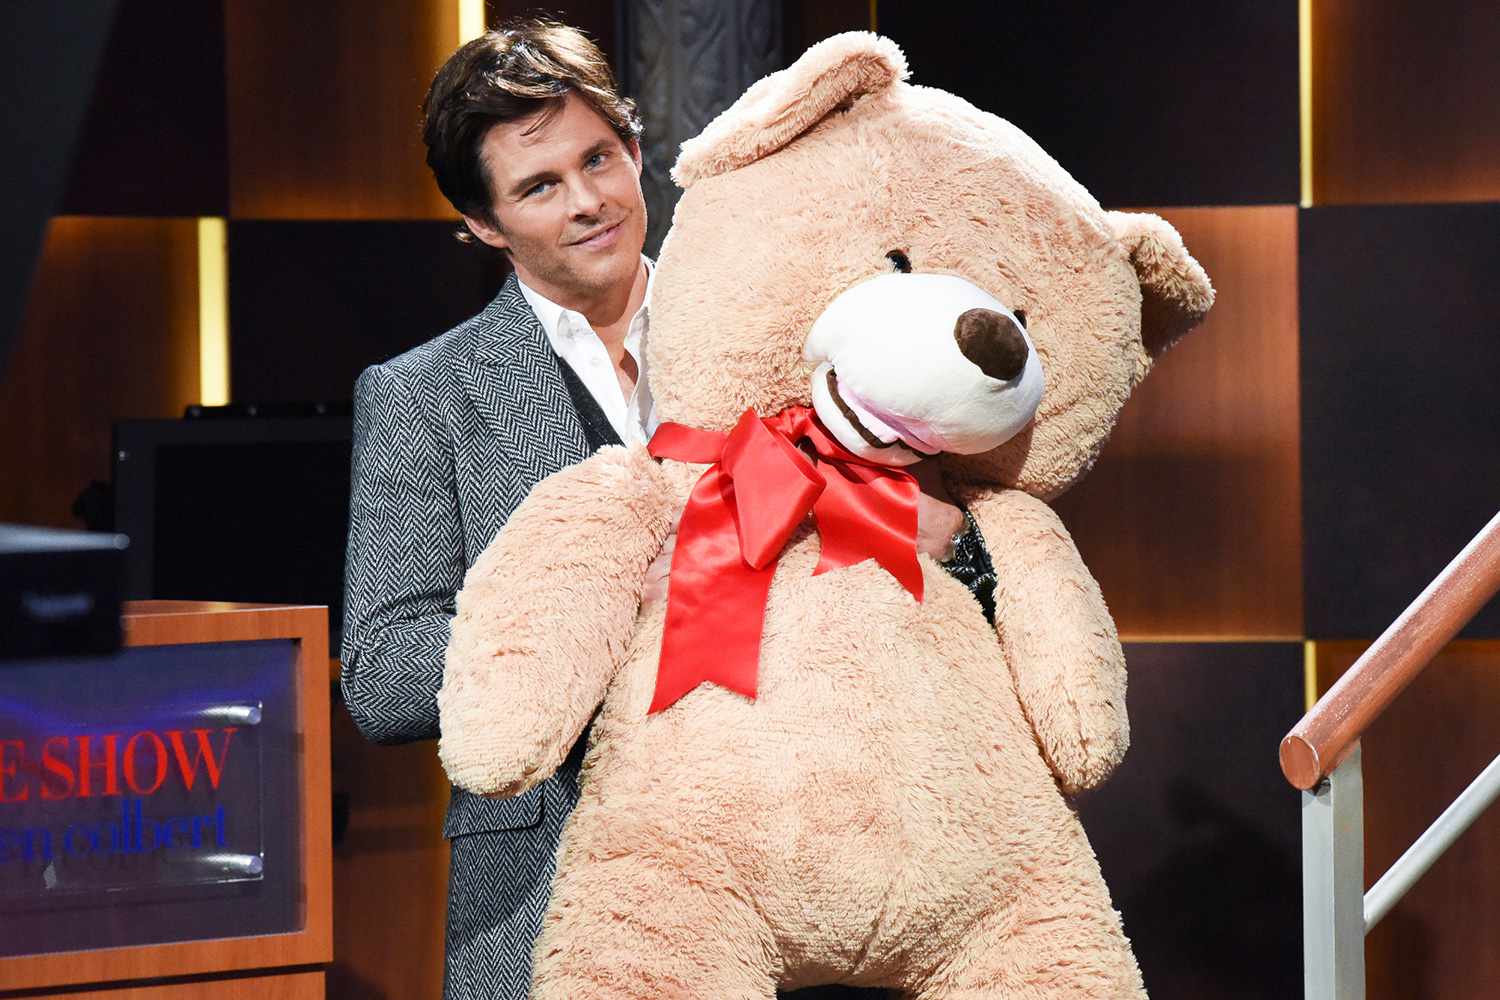 The Late Show with Stephen Colbert and guest James Marsden during Thursday's February 13, 2020